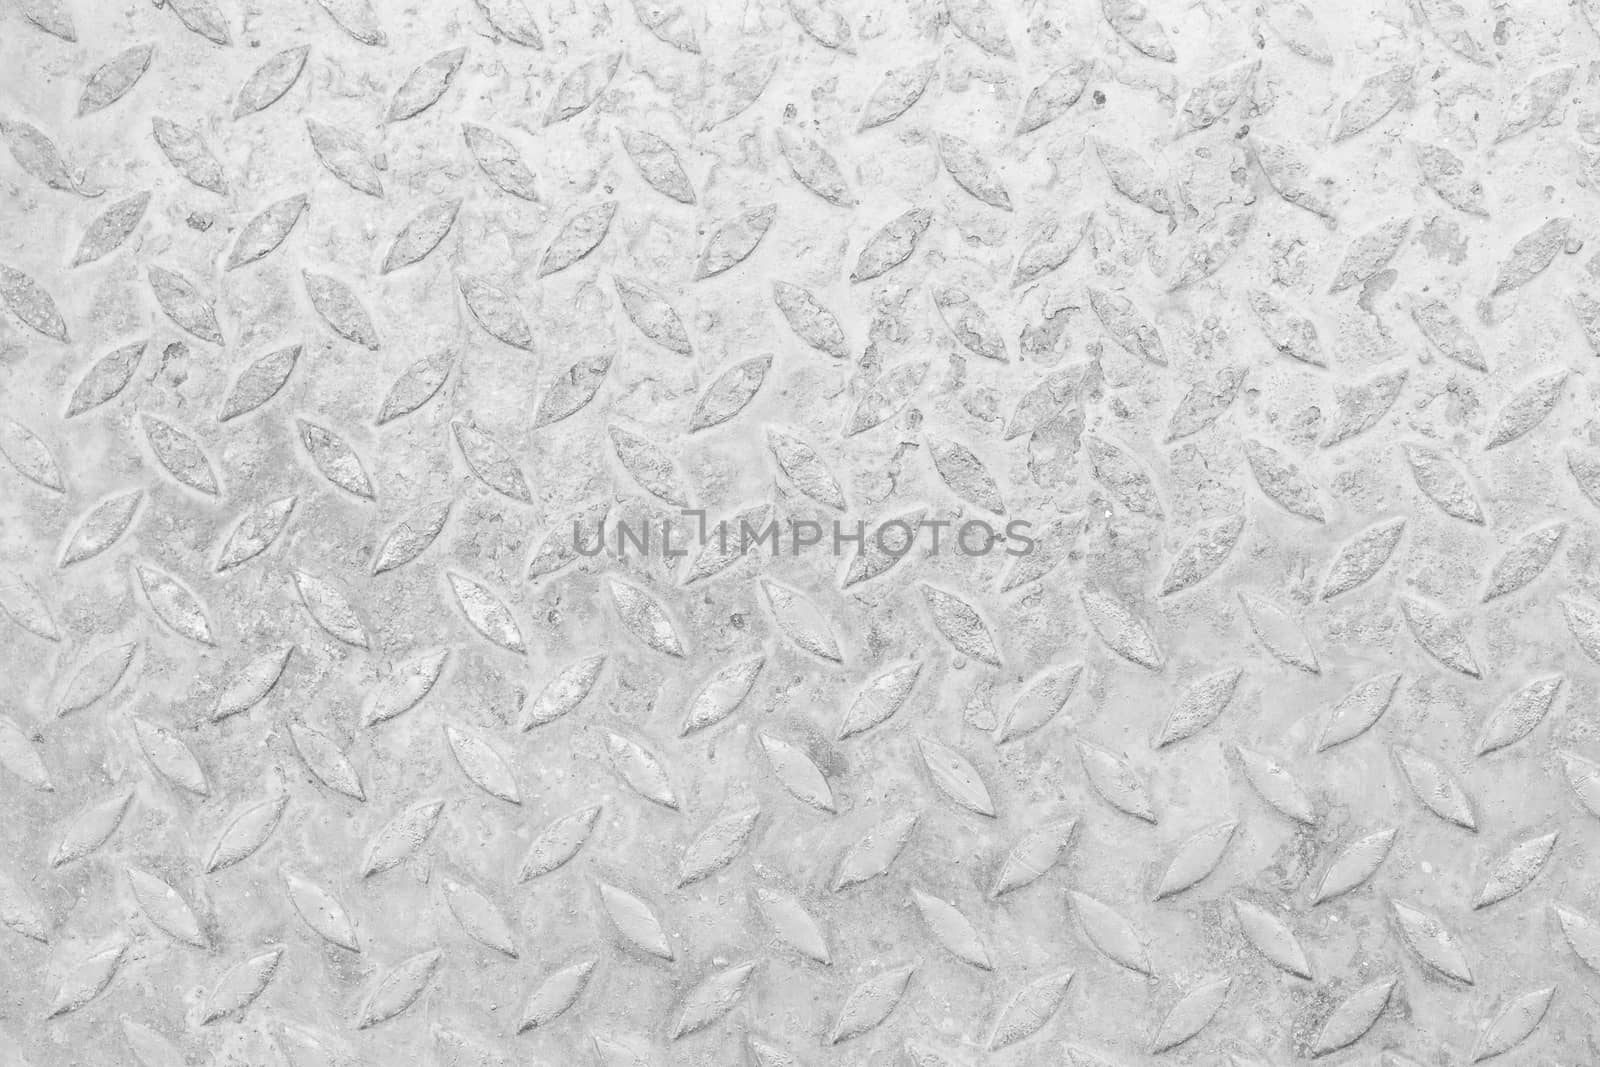 White background texture of grunged metal pattern